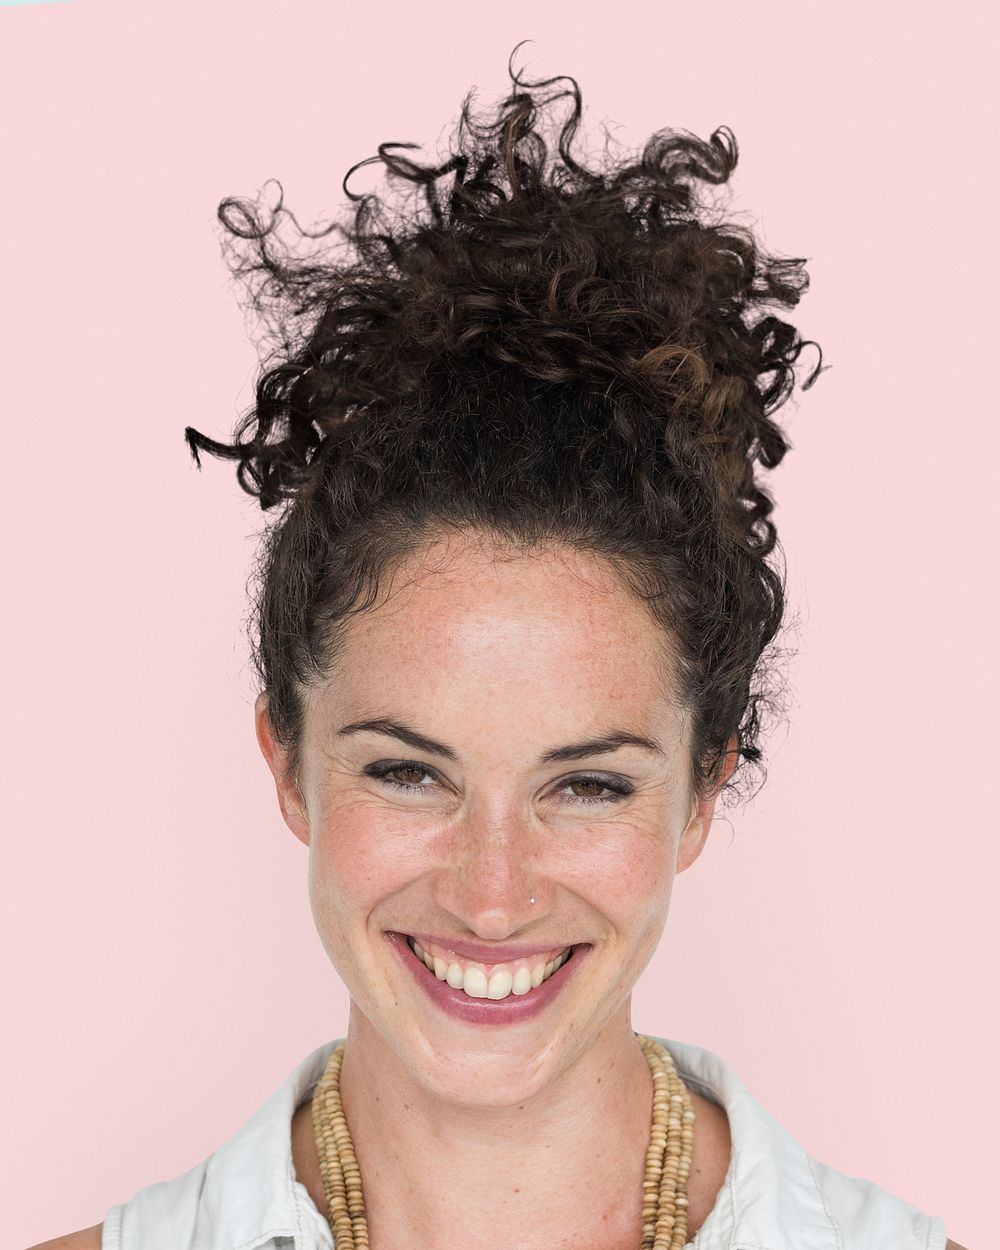 Curly haired woman portrait, smiling face close up psd